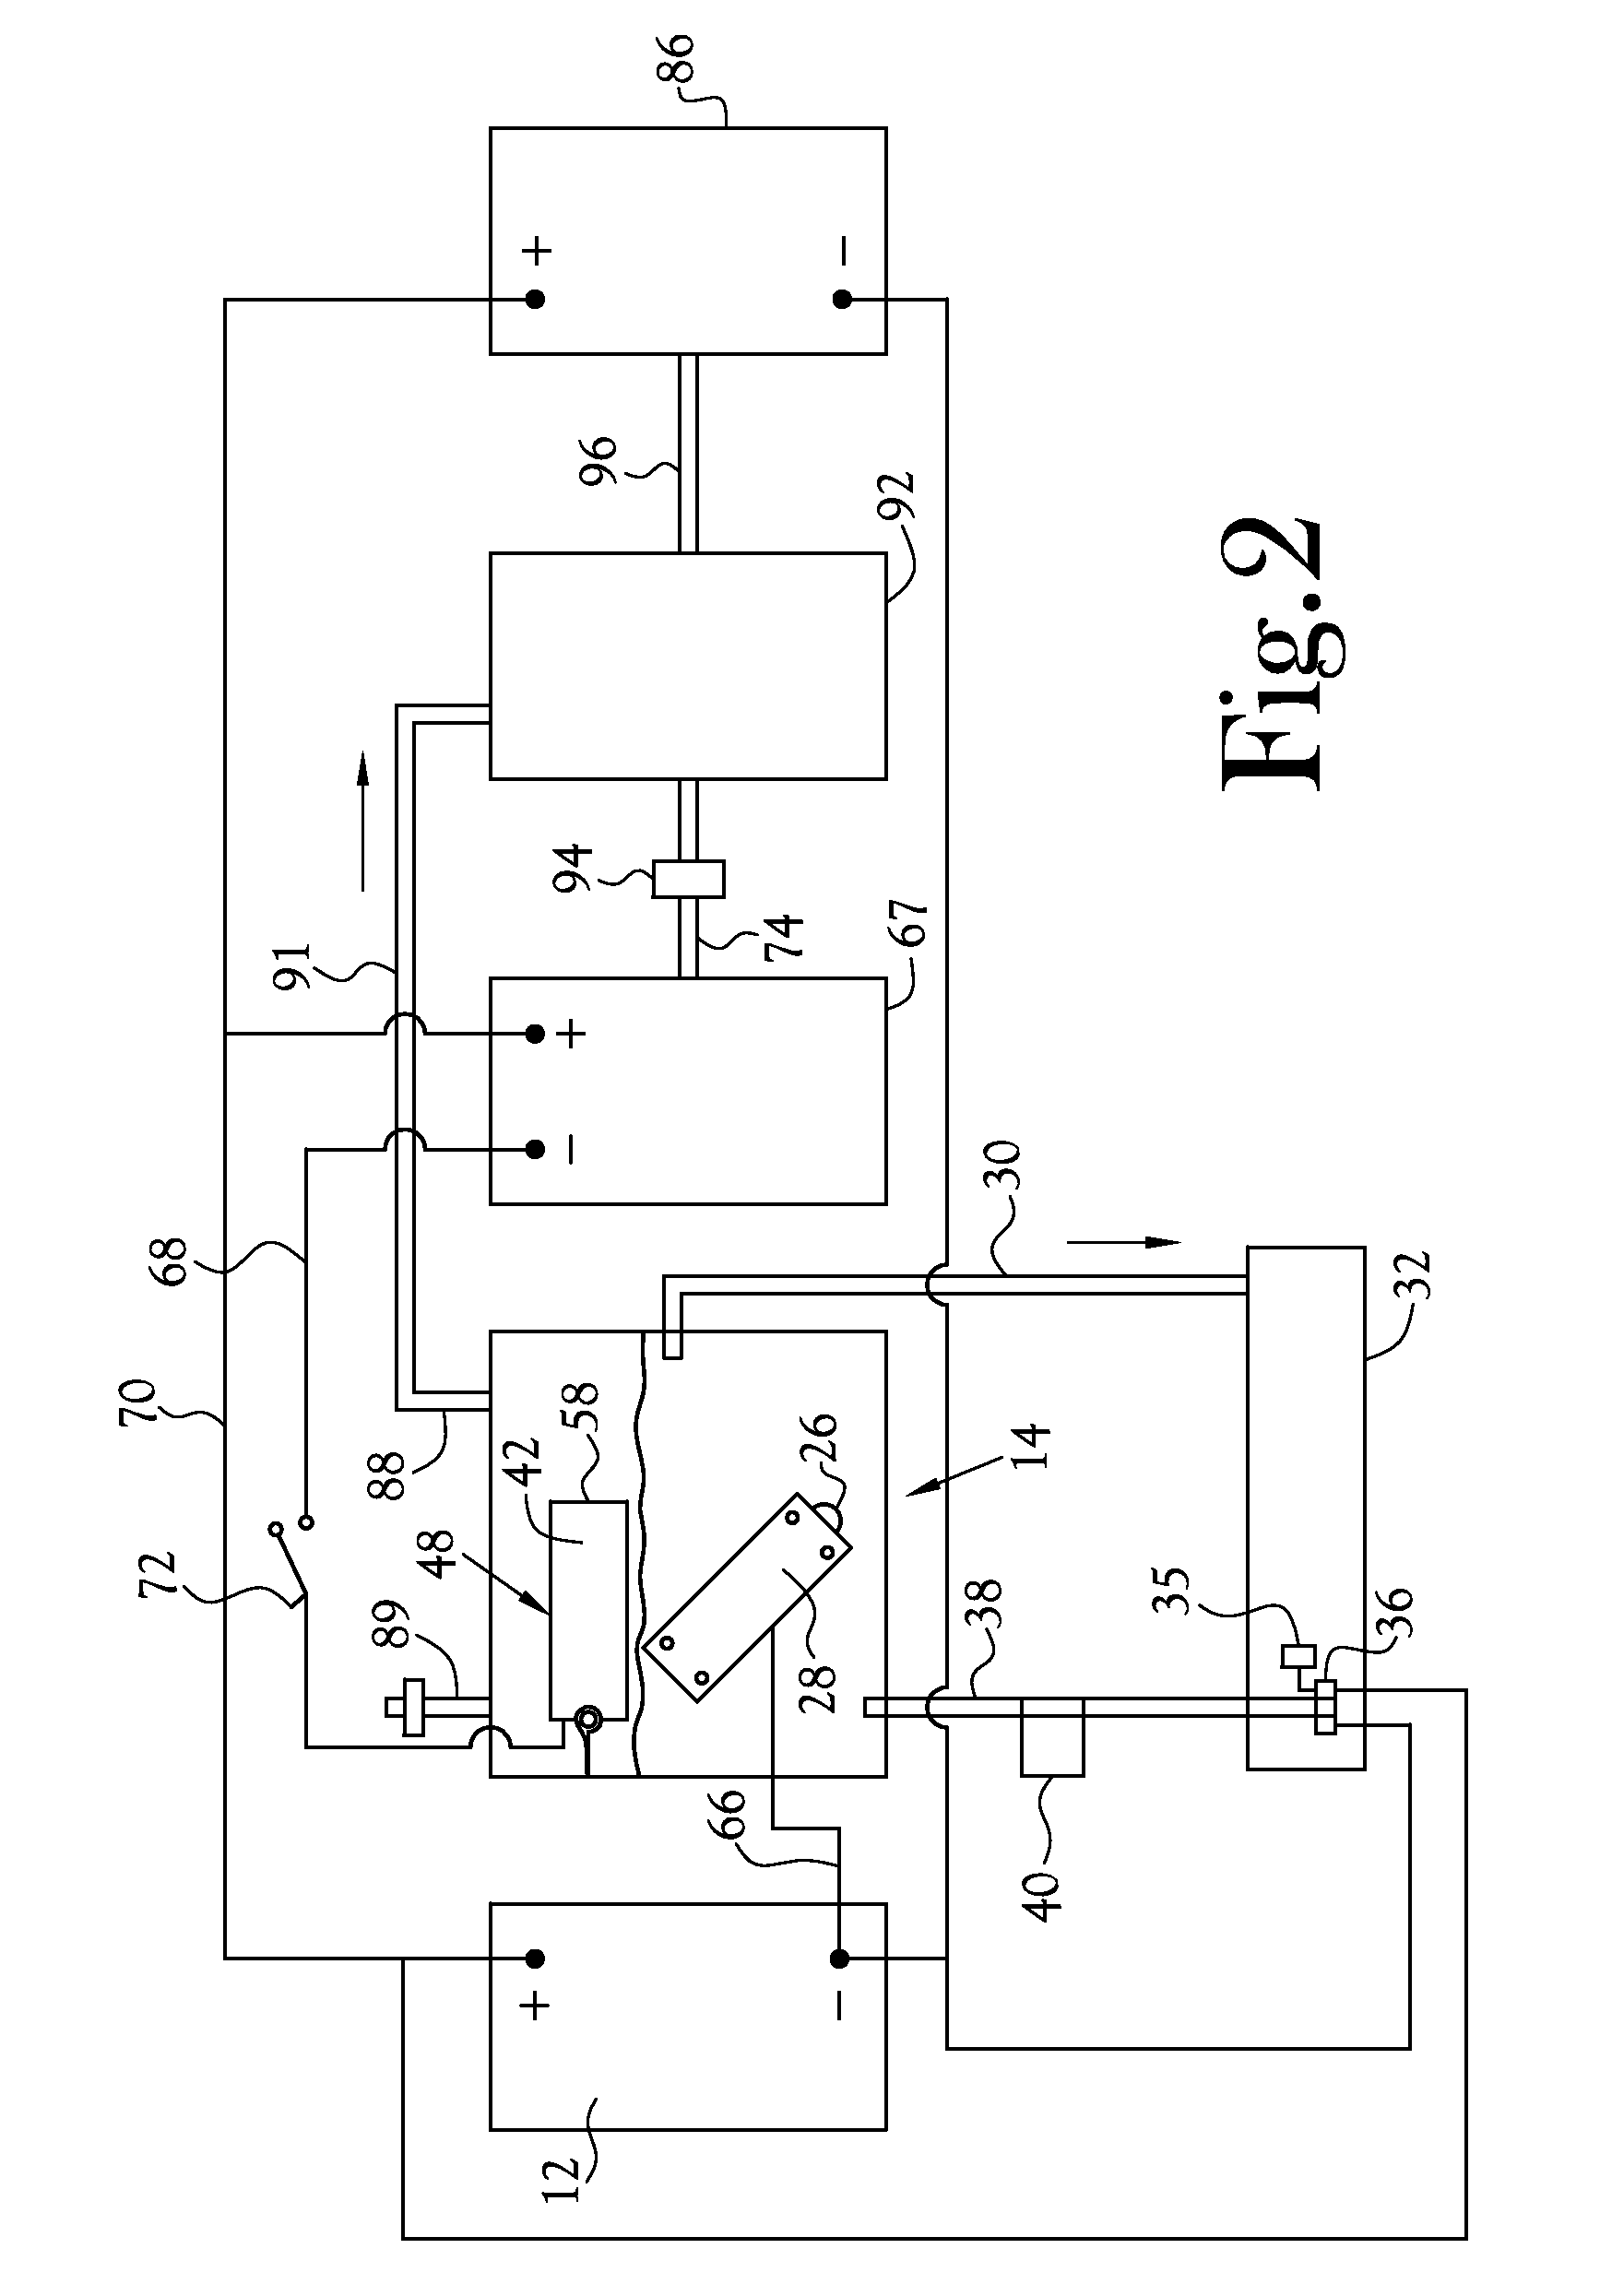 Method and Apparatus for Controlling an Electric Motor and an Internal Combustion Engine